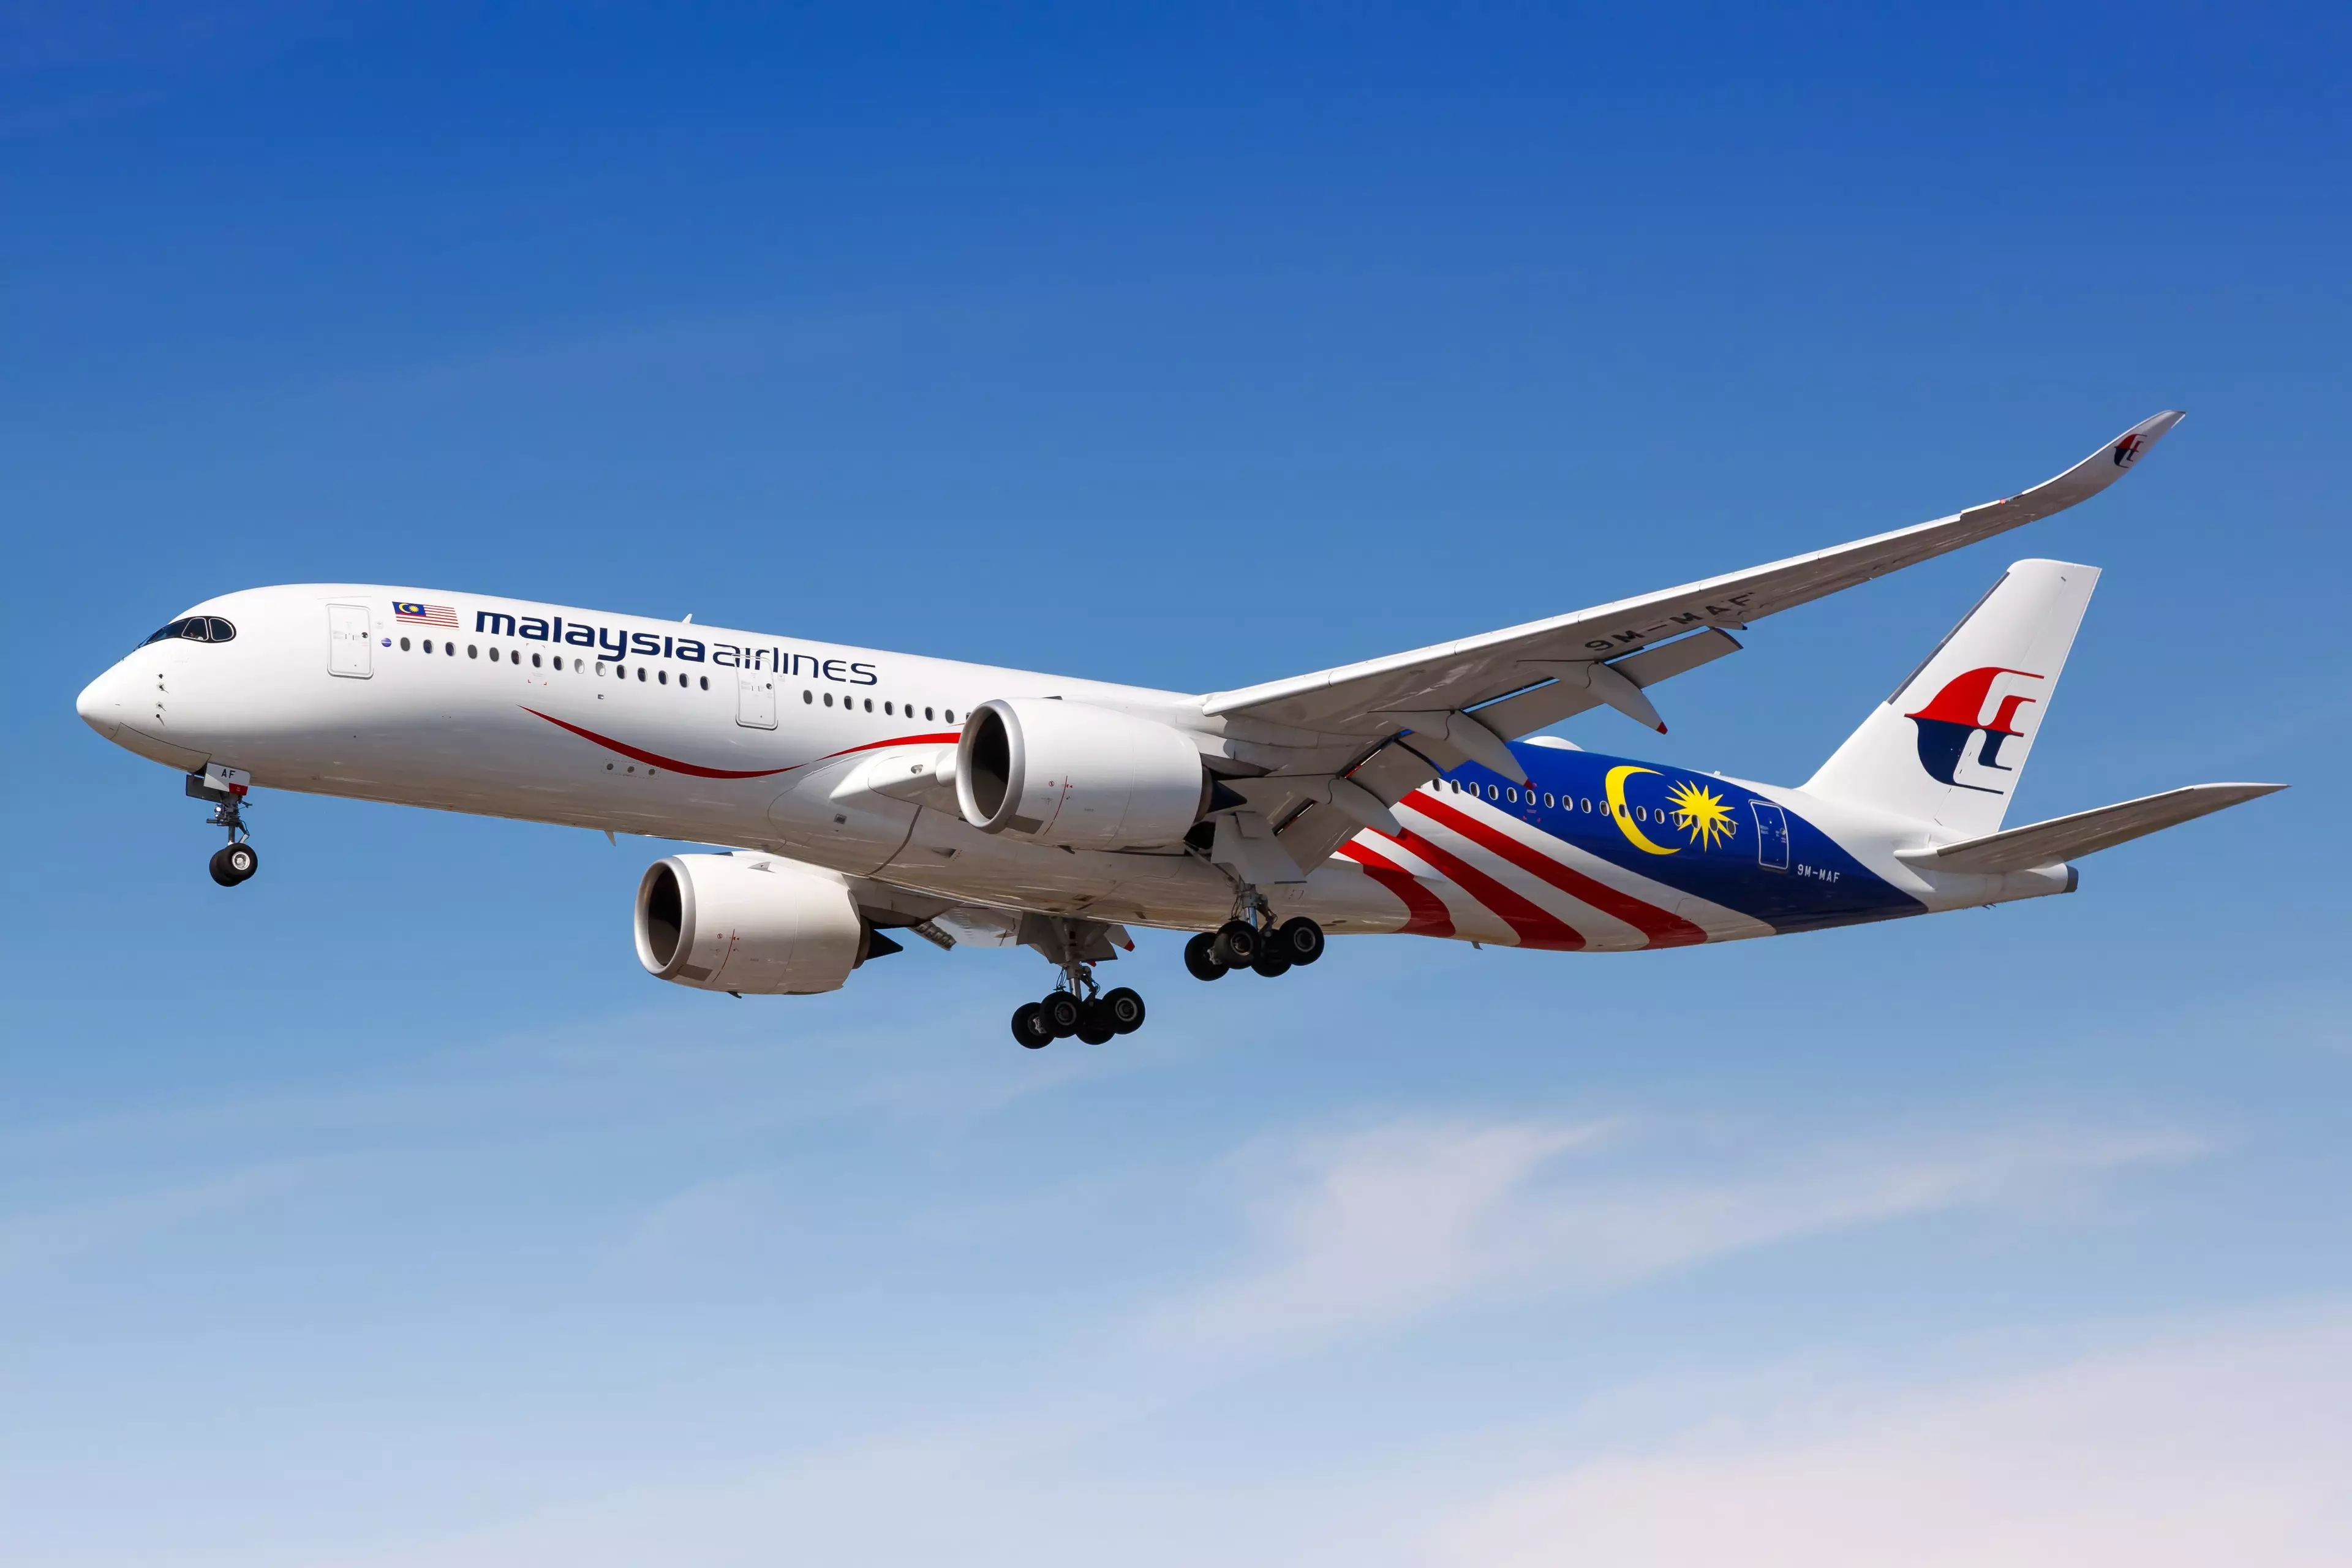 The court ruled in favour of Malaysia Airlines.